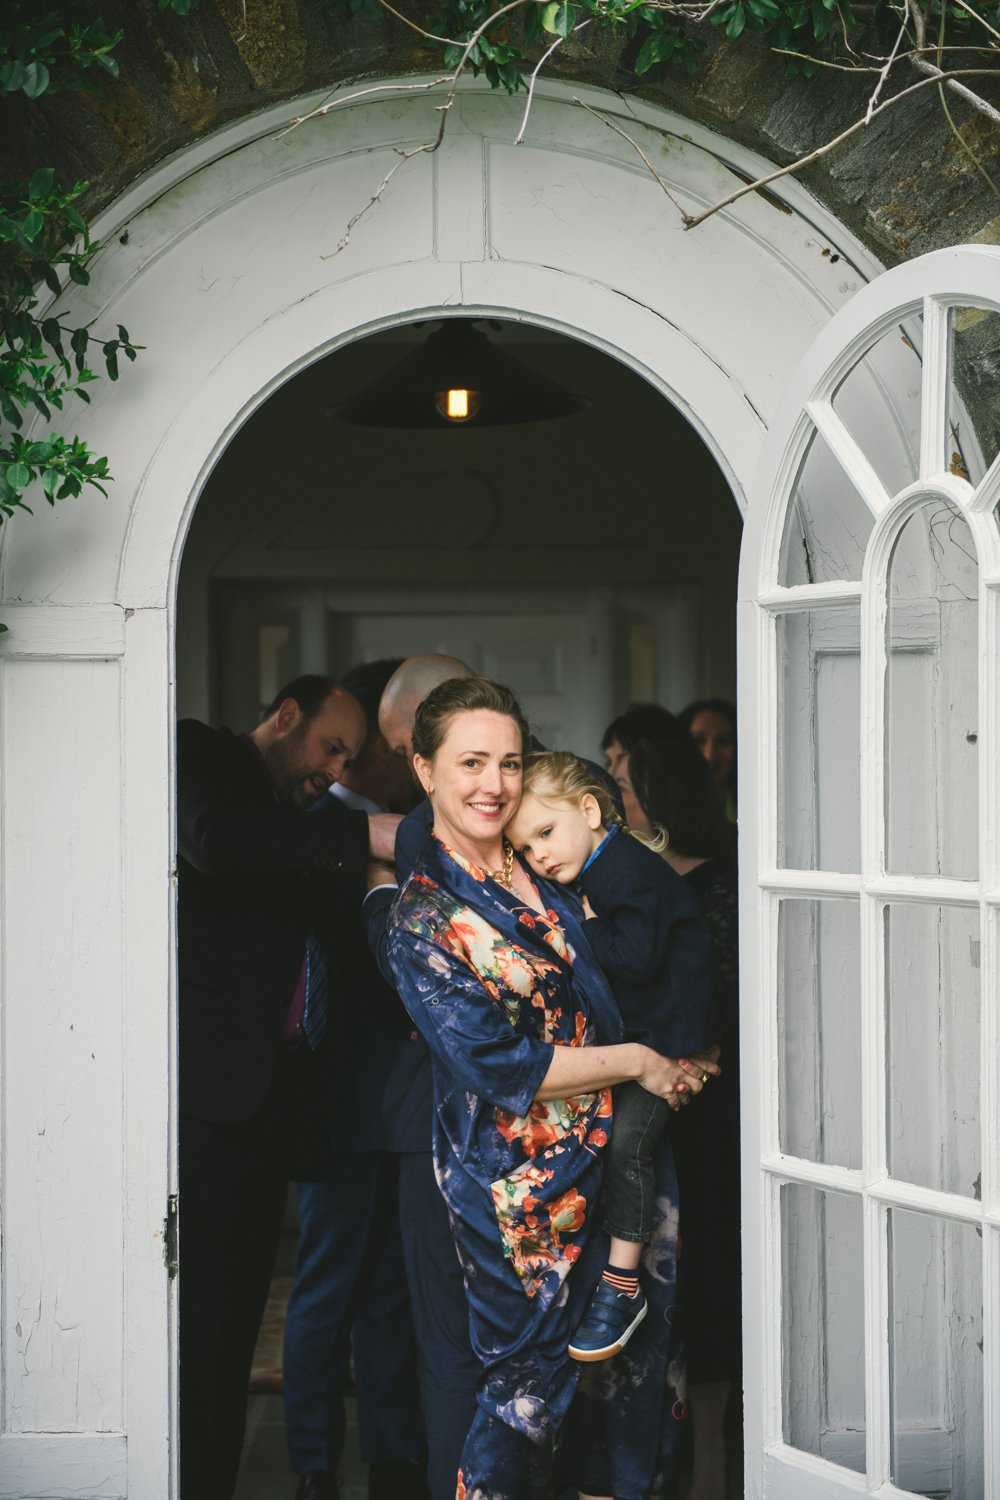 Wedding guest stands in a doorway holding a young boy on her hip and smiles at the camera. Wedding guests are standing behind her.

Upstate New York Wedding Photography. Cold Spring NY Wedding Photography. Luxury Local Wedding Photographer. Destination Wedding Photographer.